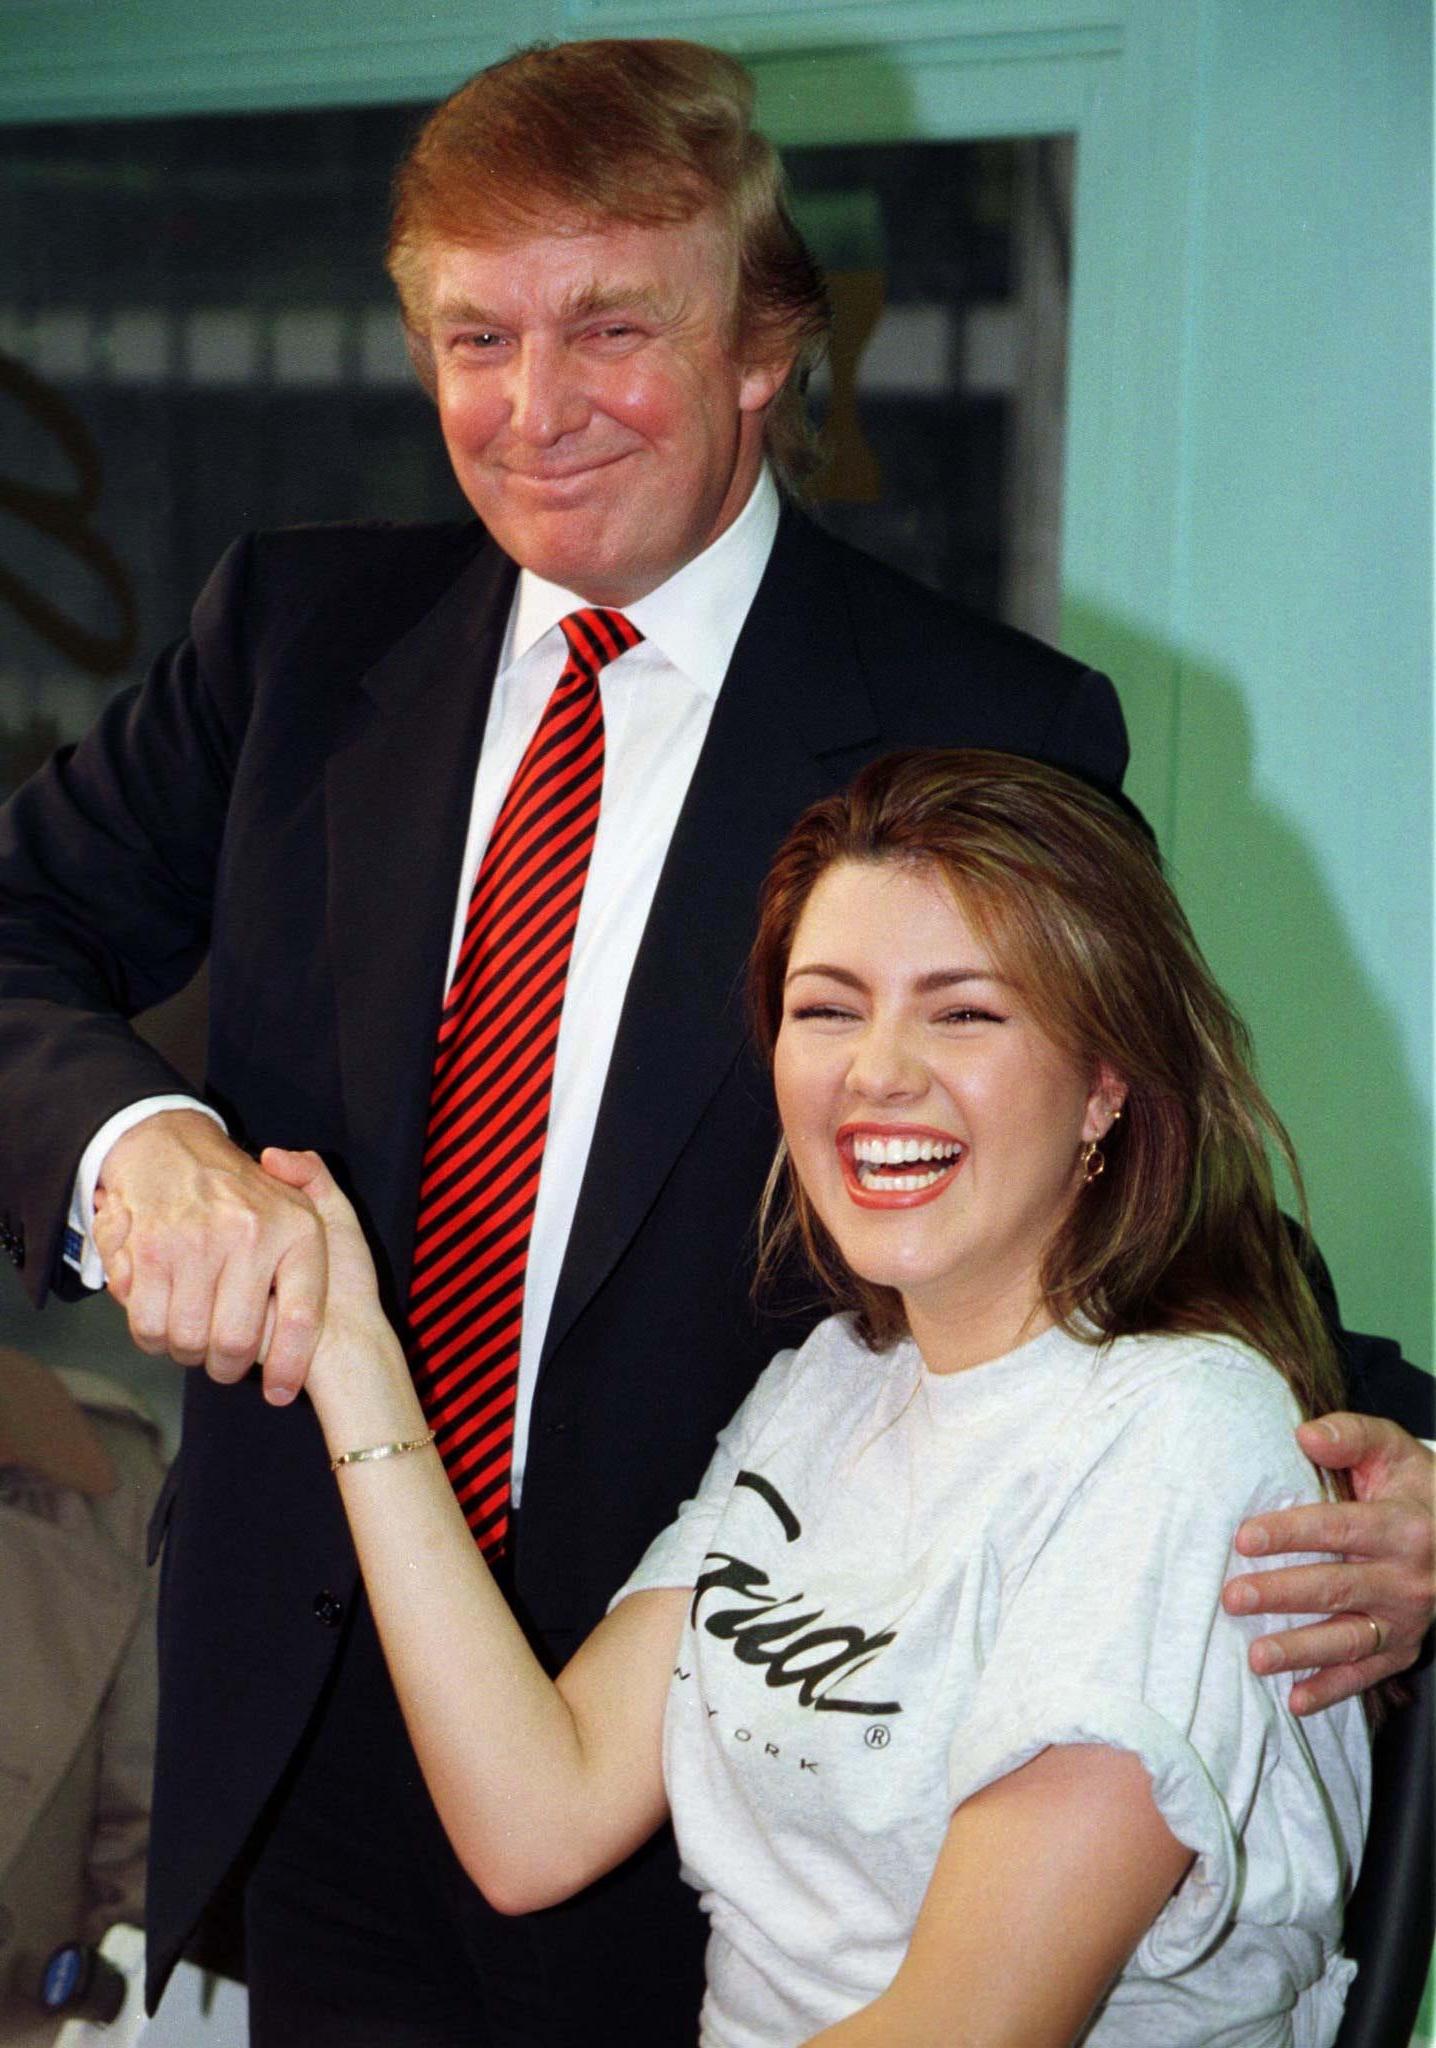 Donald Trump Insults Former Miss Universe Alicia Machado On Twitter